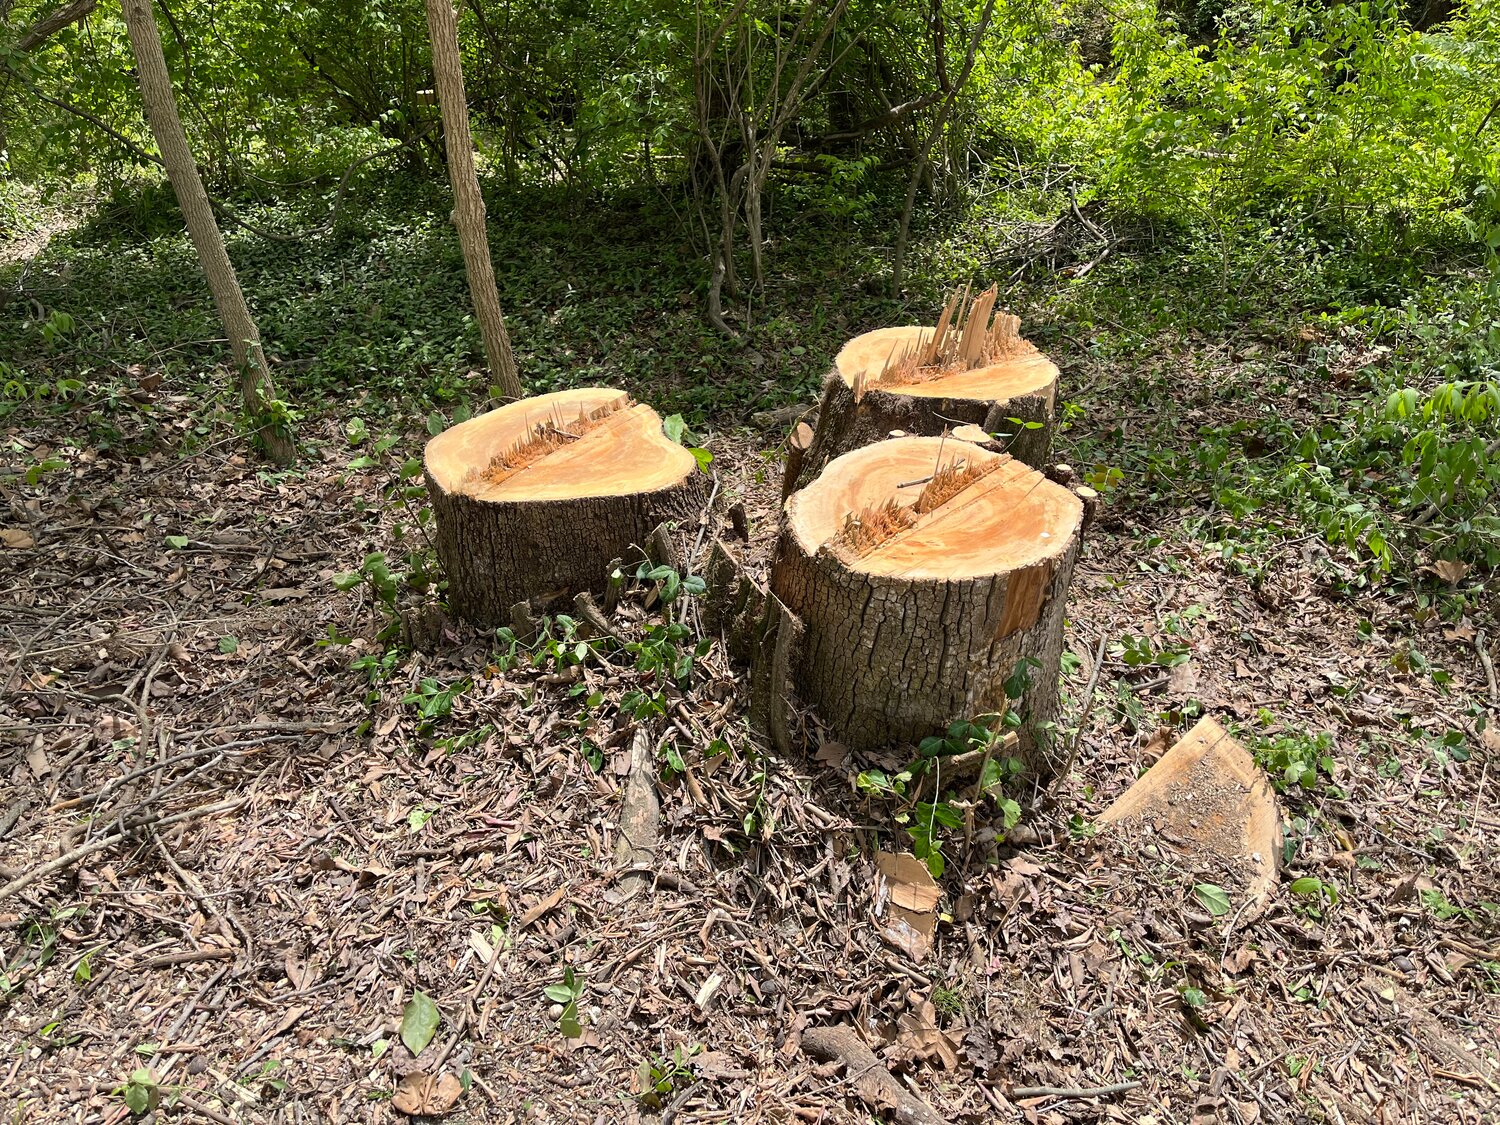 STUMPED - Polecats will level some tree stumps out to allow Ruge Park visitors to use them as a place to sit, said Jayson Pohlmann, Polecats owner.